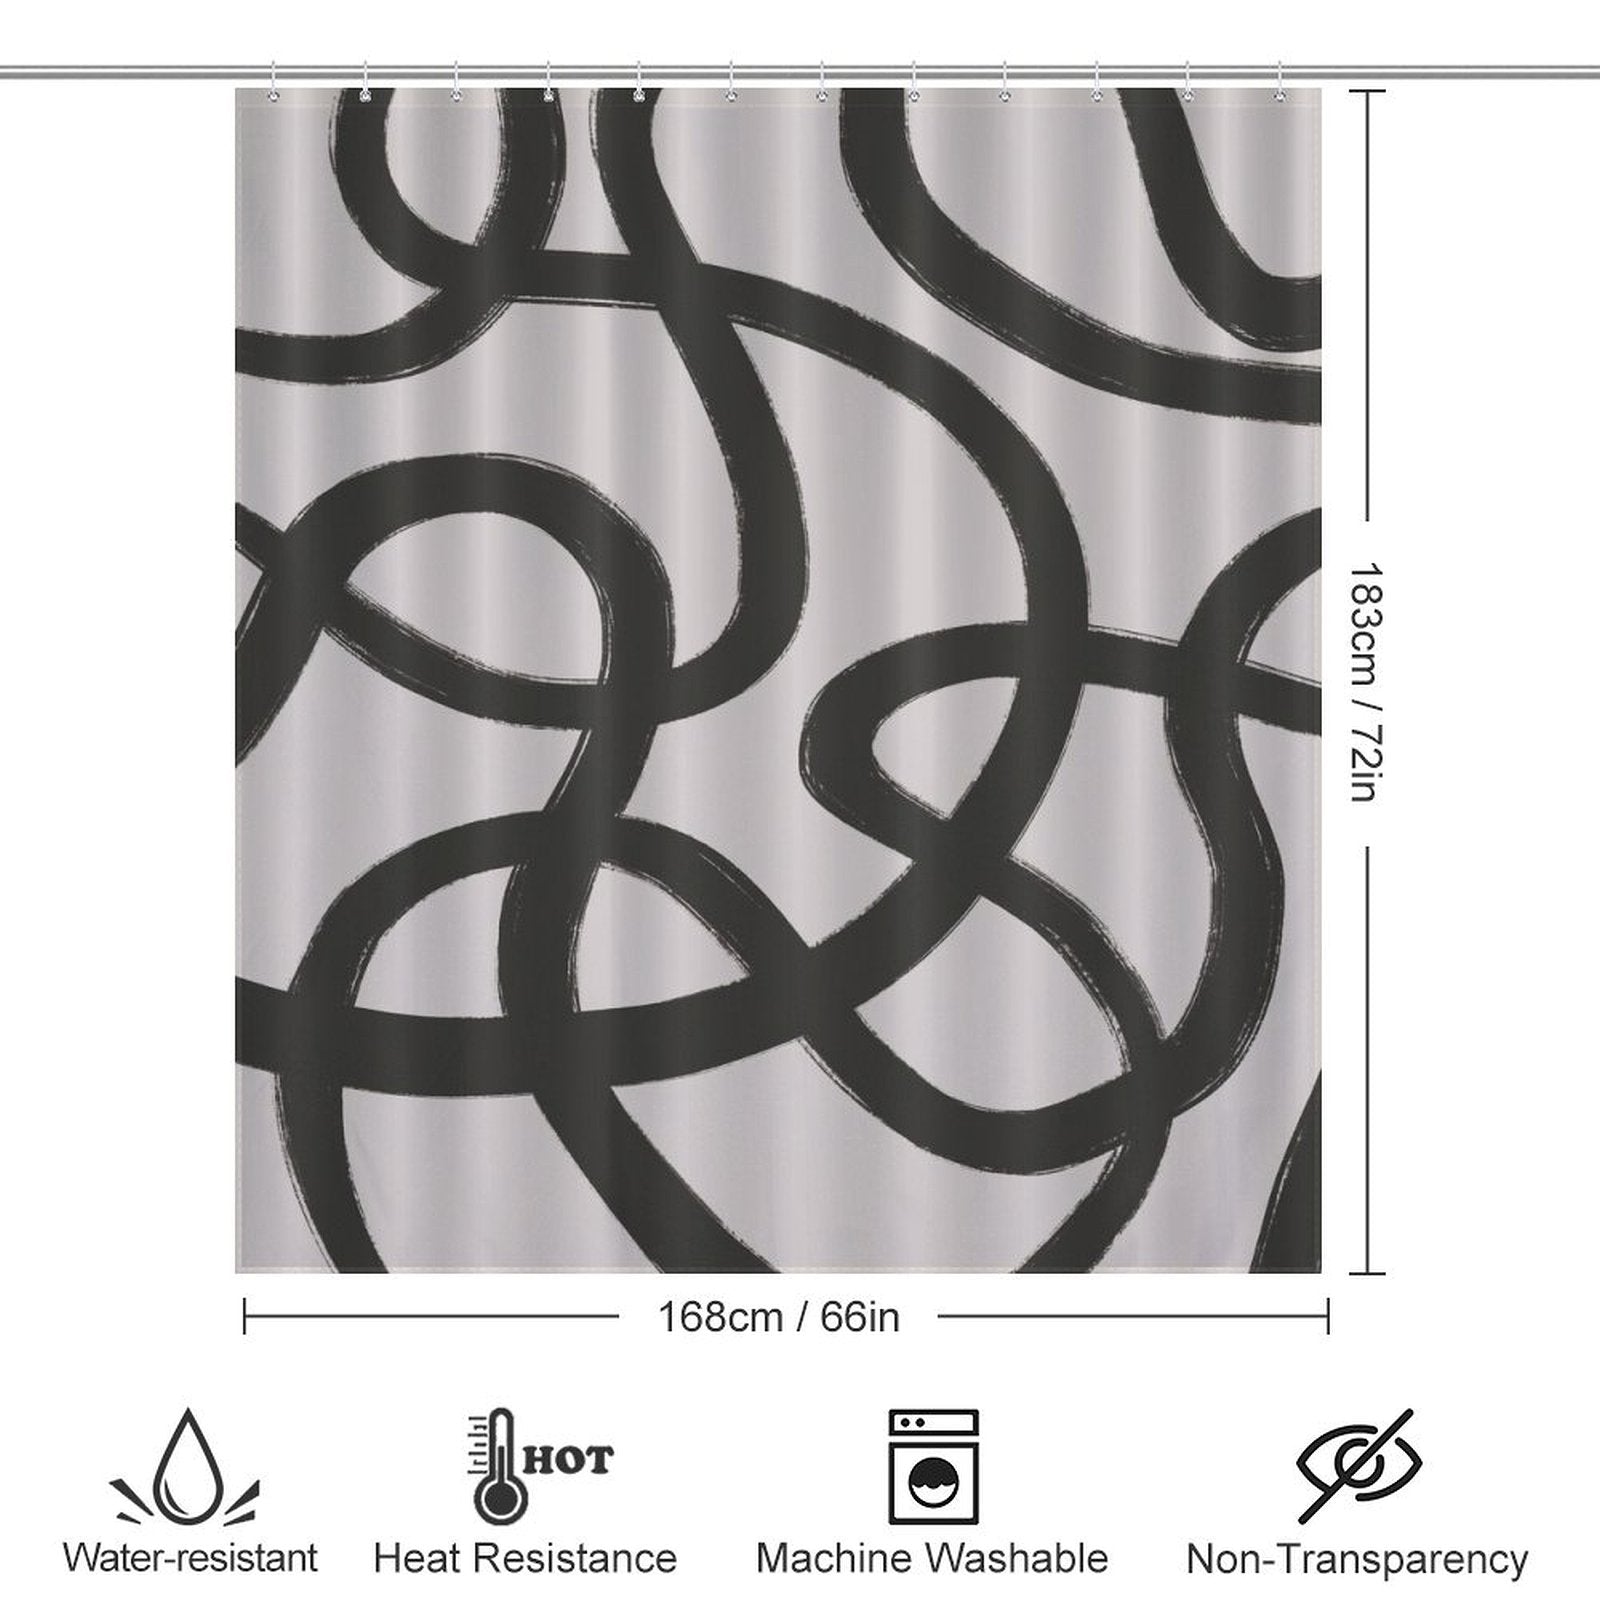 A white shower curtain featuring a modern geometric art design with black abstract swirl elements. Dimensions are 183 cm high by 168 cm wide. The Cotton Cat Modern Geometric Art Minimalist Curve Black Line Black and Grey Abstract Shower Curtain-Cottoncat is water-resistant, heat resistant, machine washable, and non-transparent.